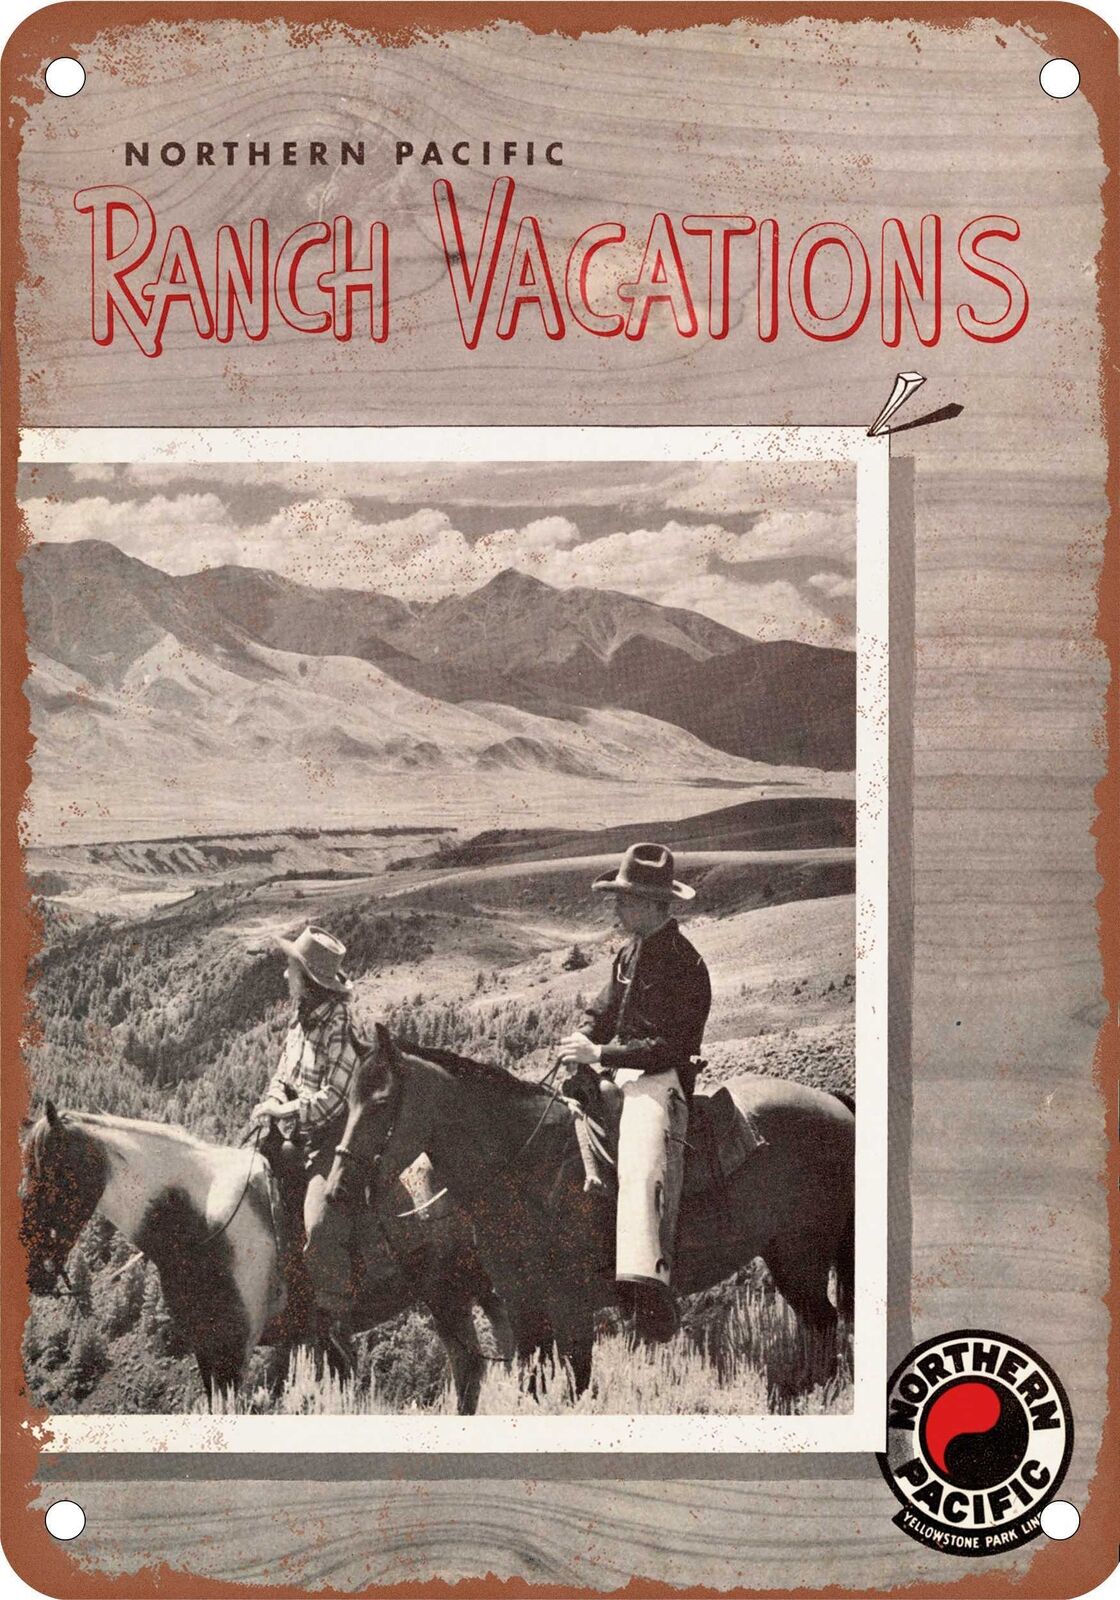 METAL SIGN - 1947 Northern Pacific Ranch Vacations - Vintage Rusty Look